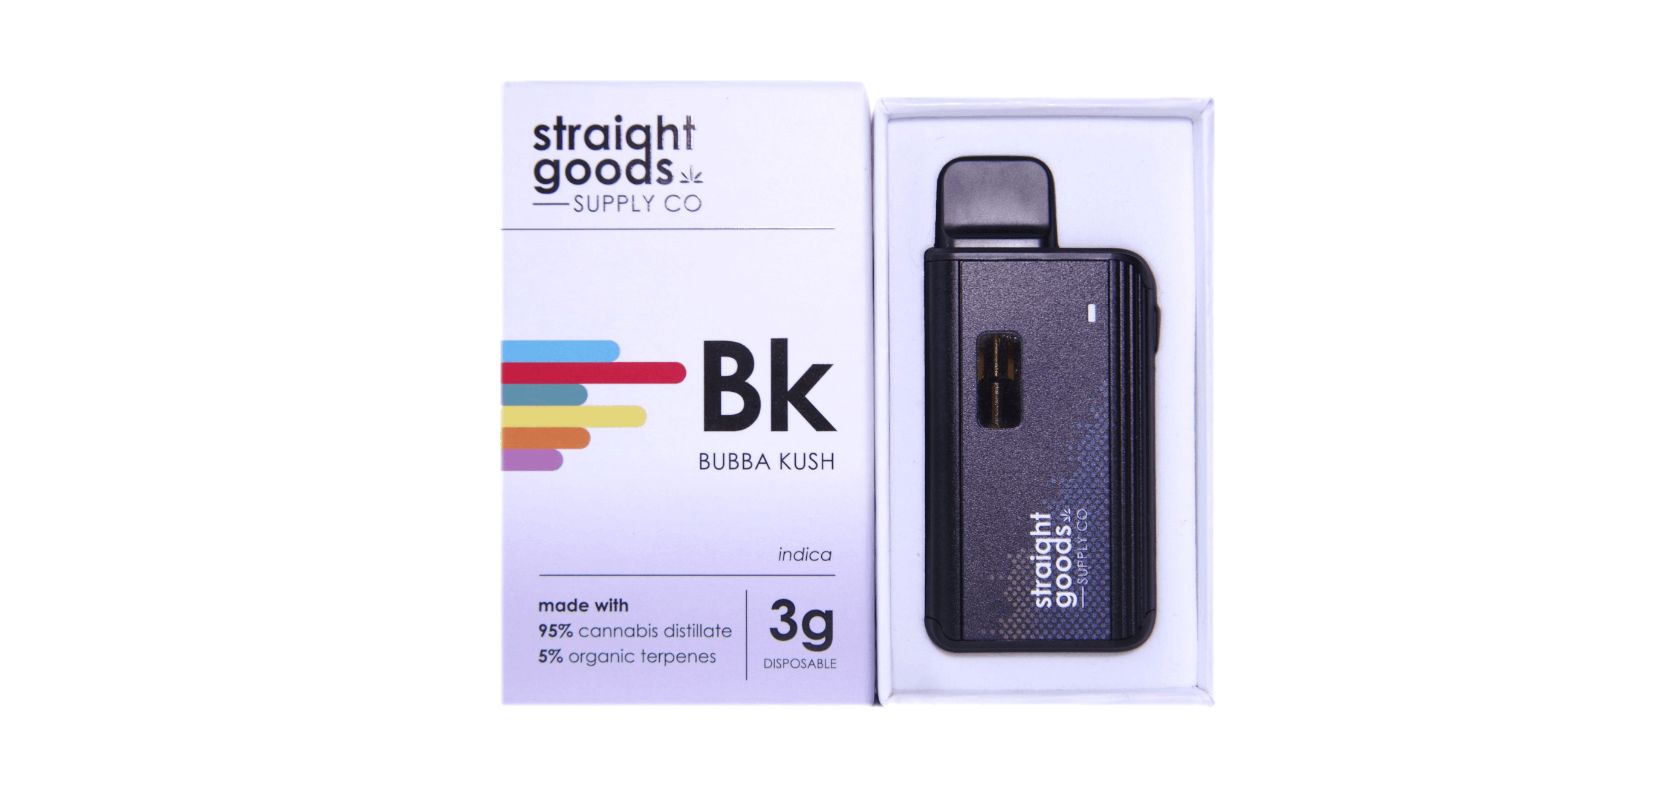 Vaping enthusiasts enamoured by the Greasy Pink strain will be obsessed with the Straight Goods – Bubba Kush 3G Disposable.